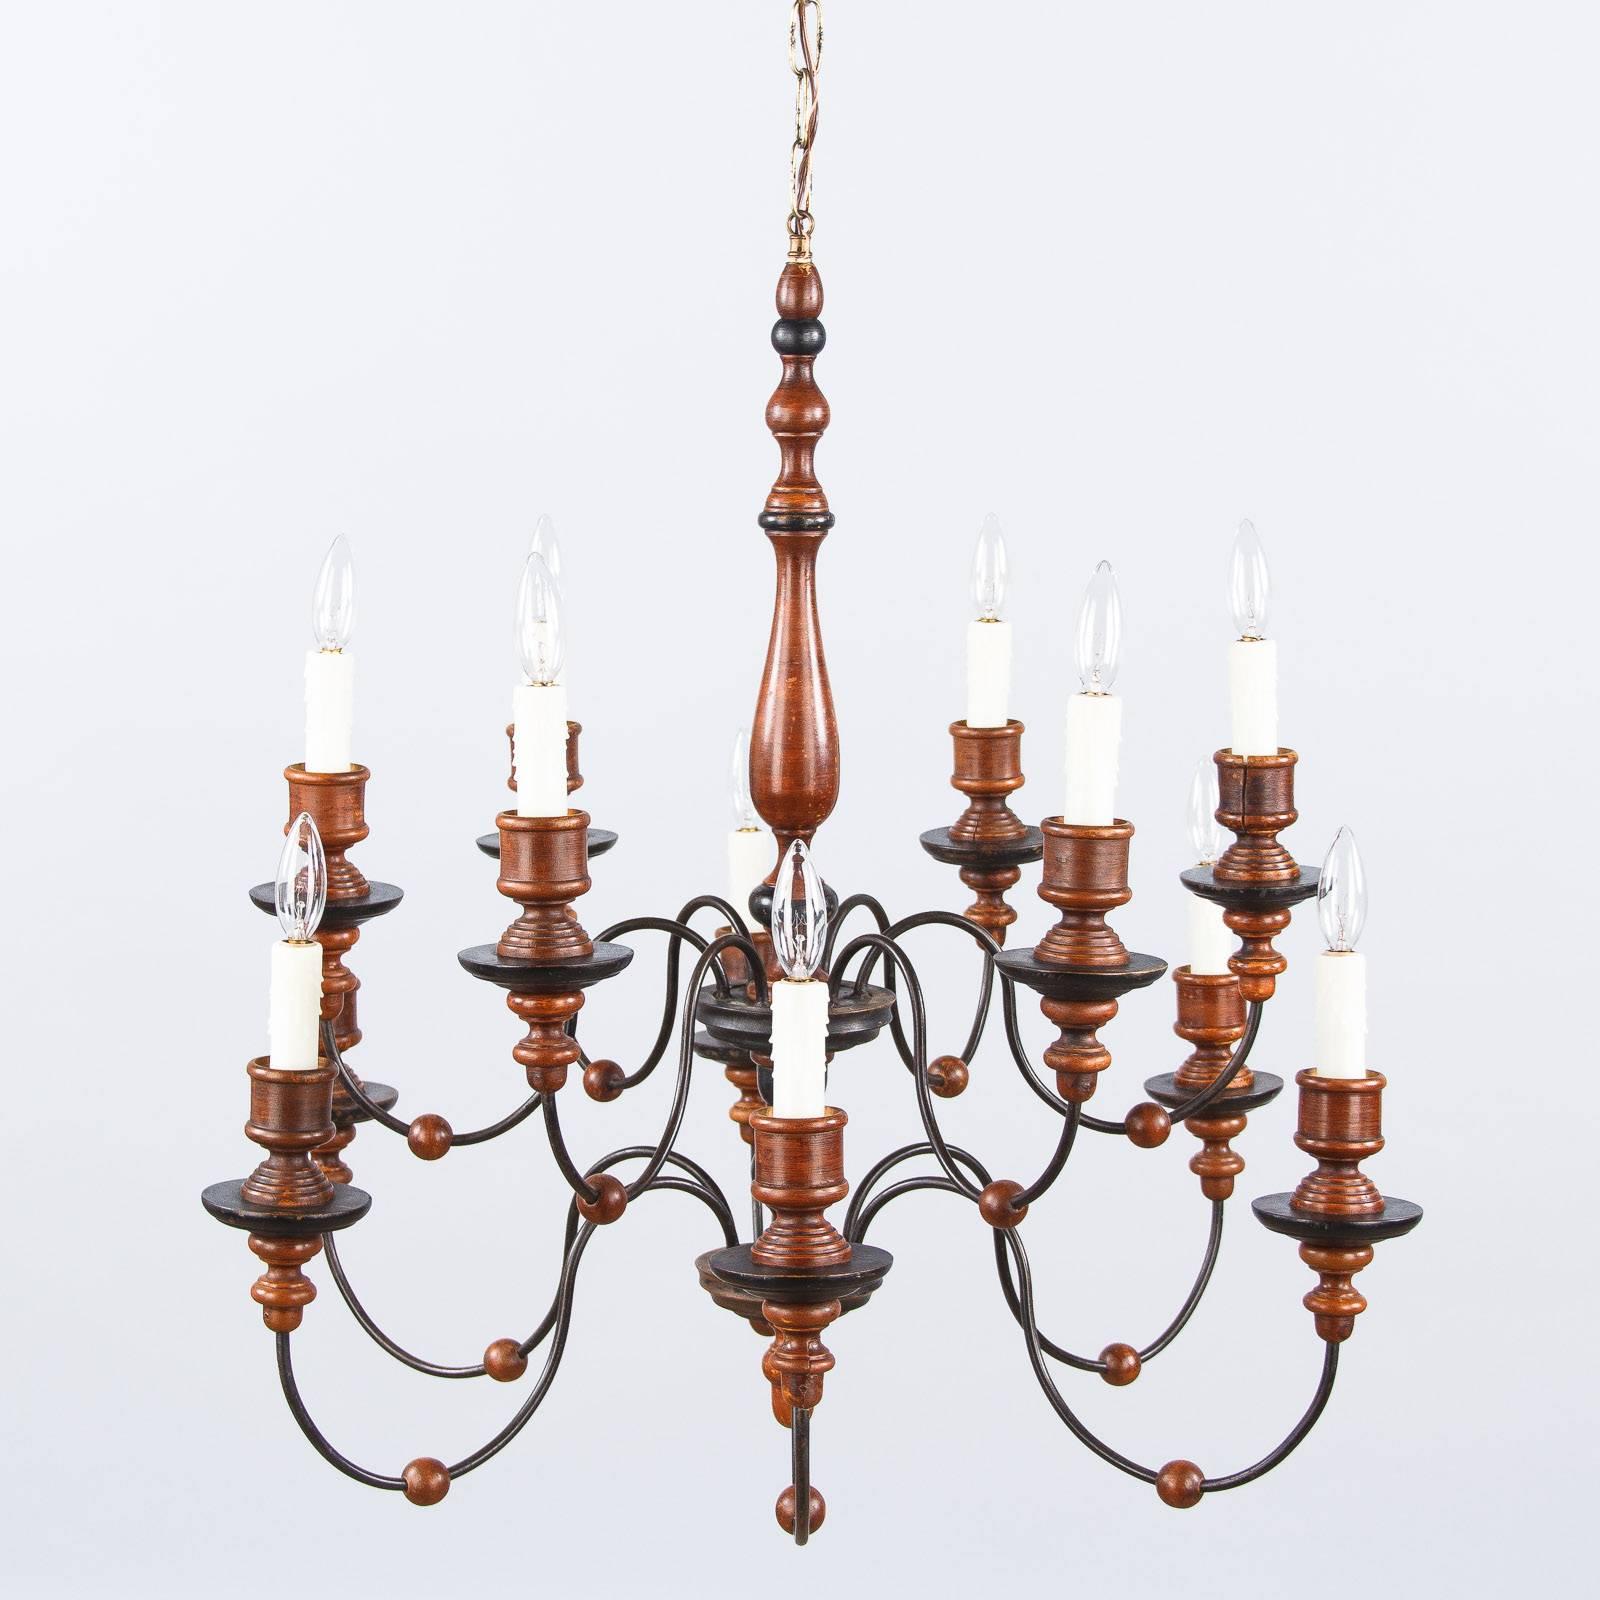 Italian Painted Wood and Metal Chandelier, 1920s-1940s 6